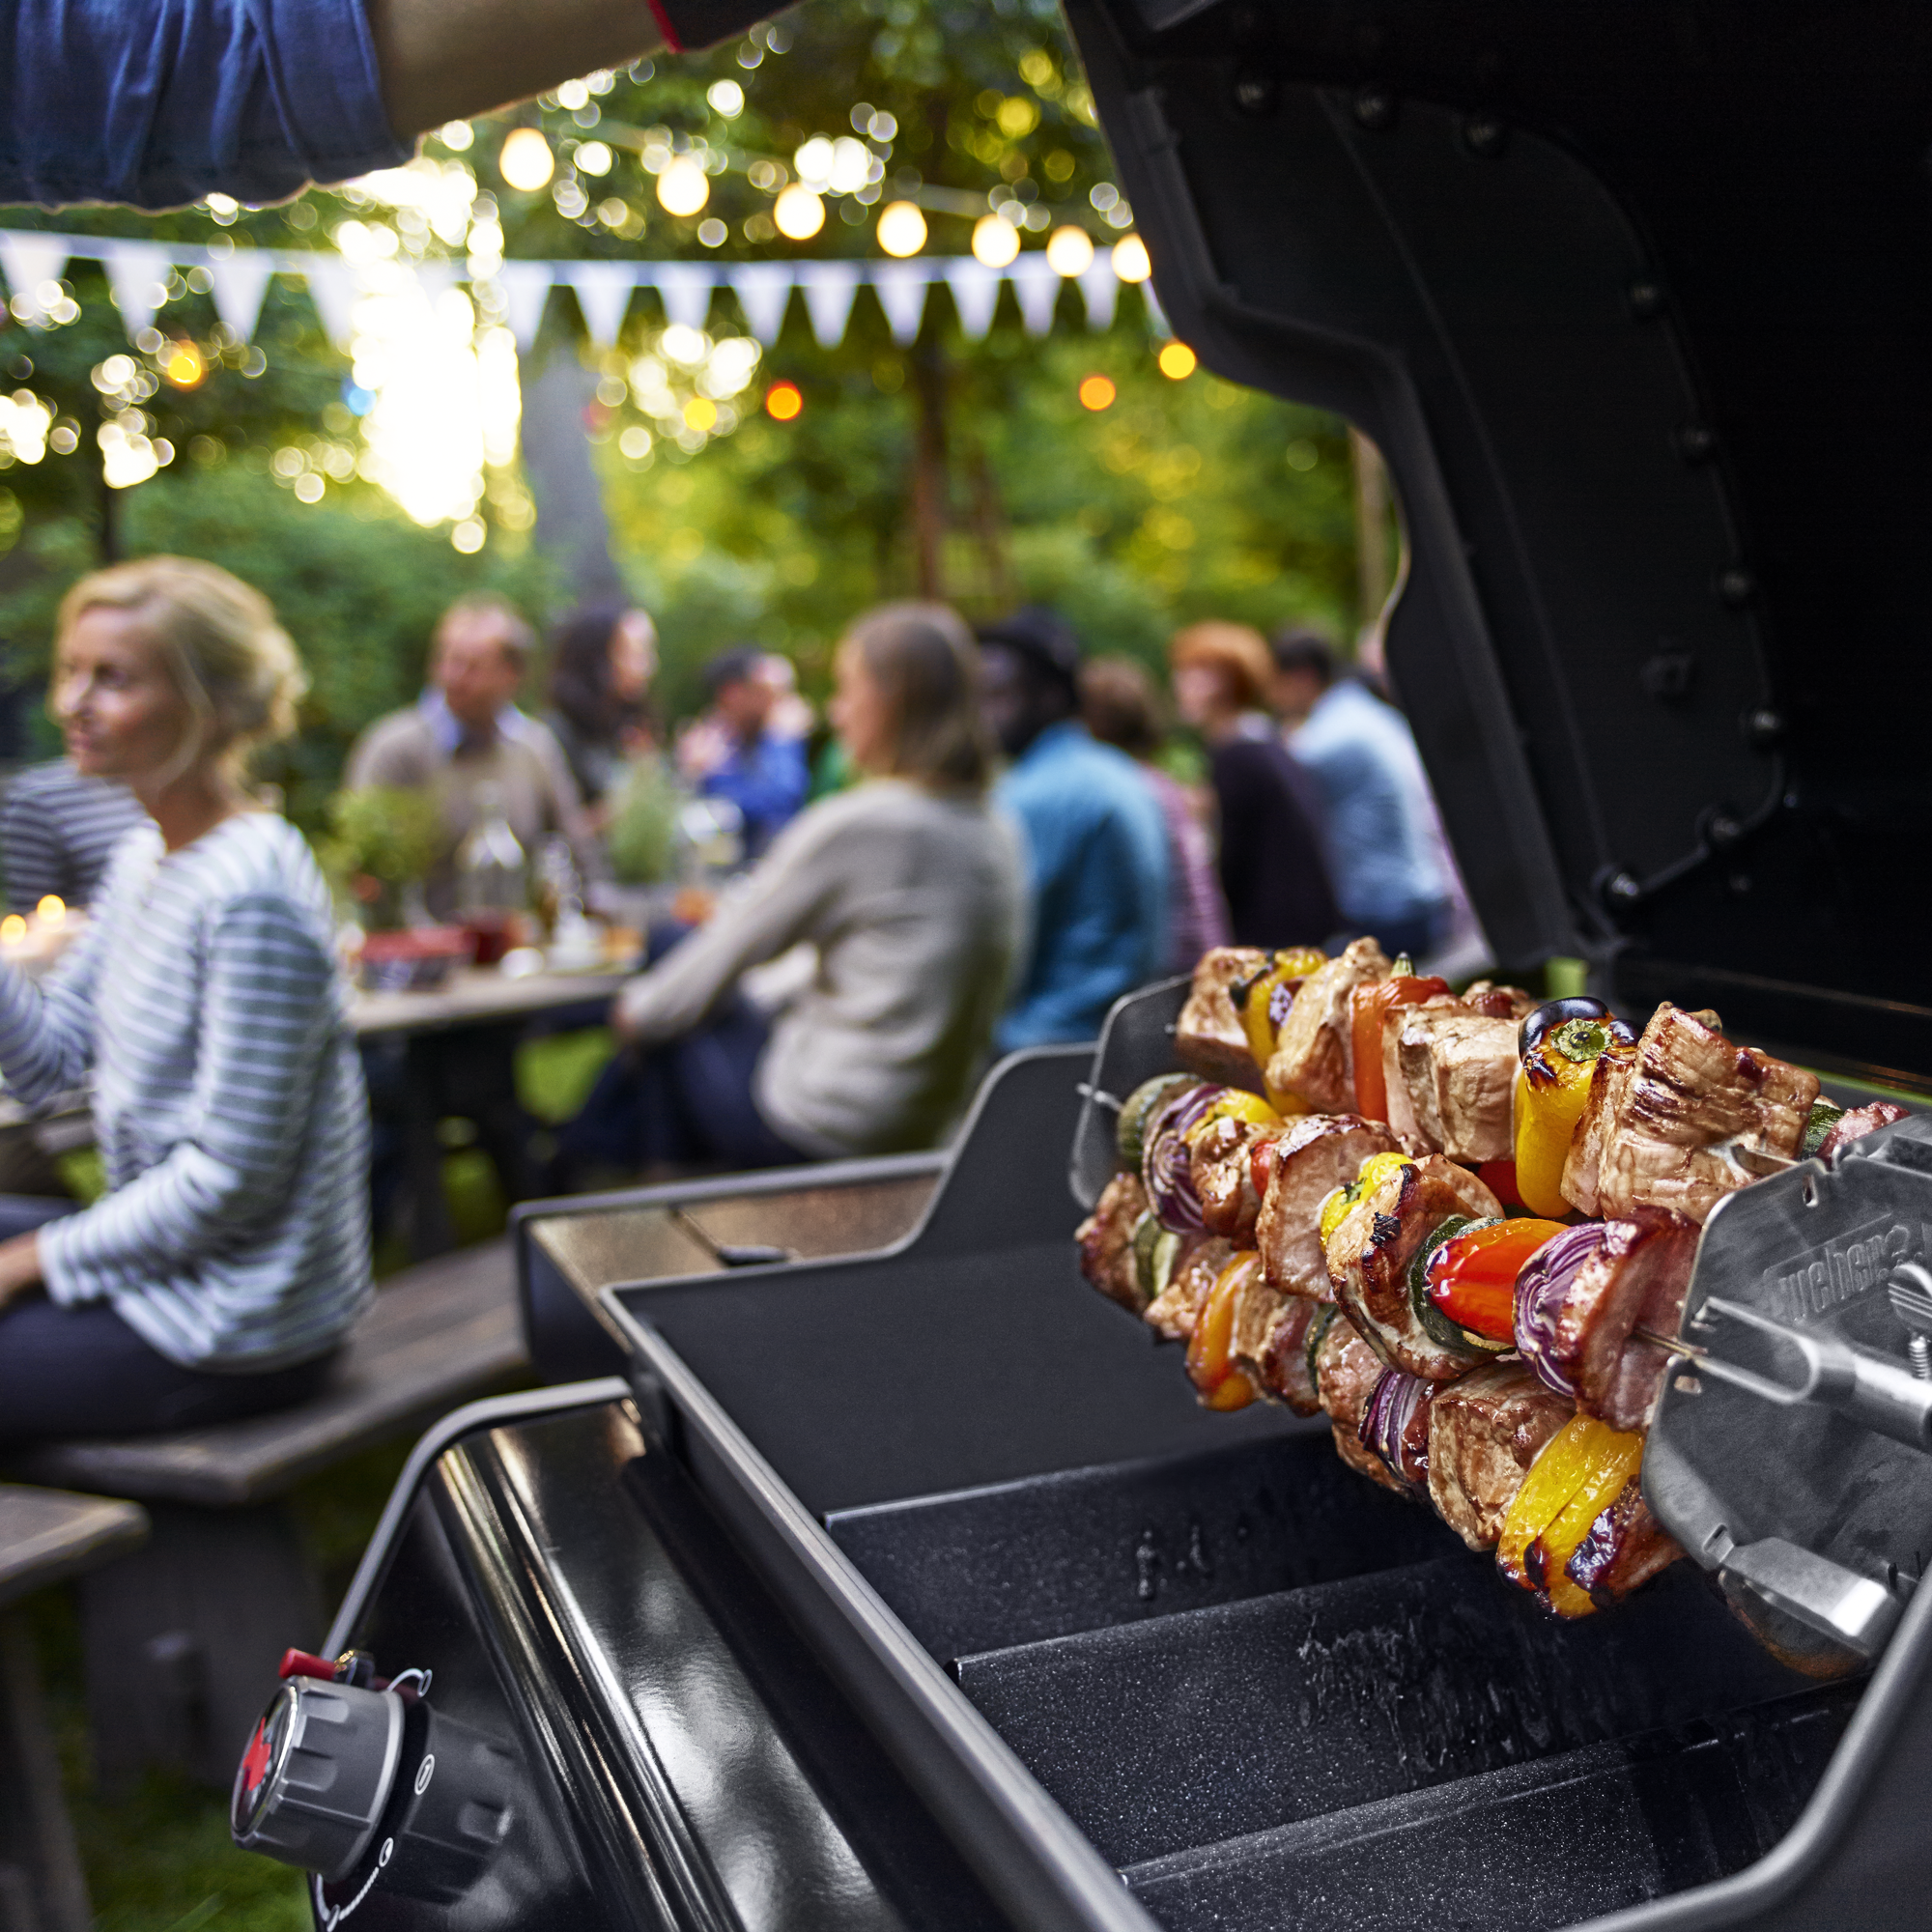 Gasgrill 'Spirit II E-310 GBS' schwarz + product picture